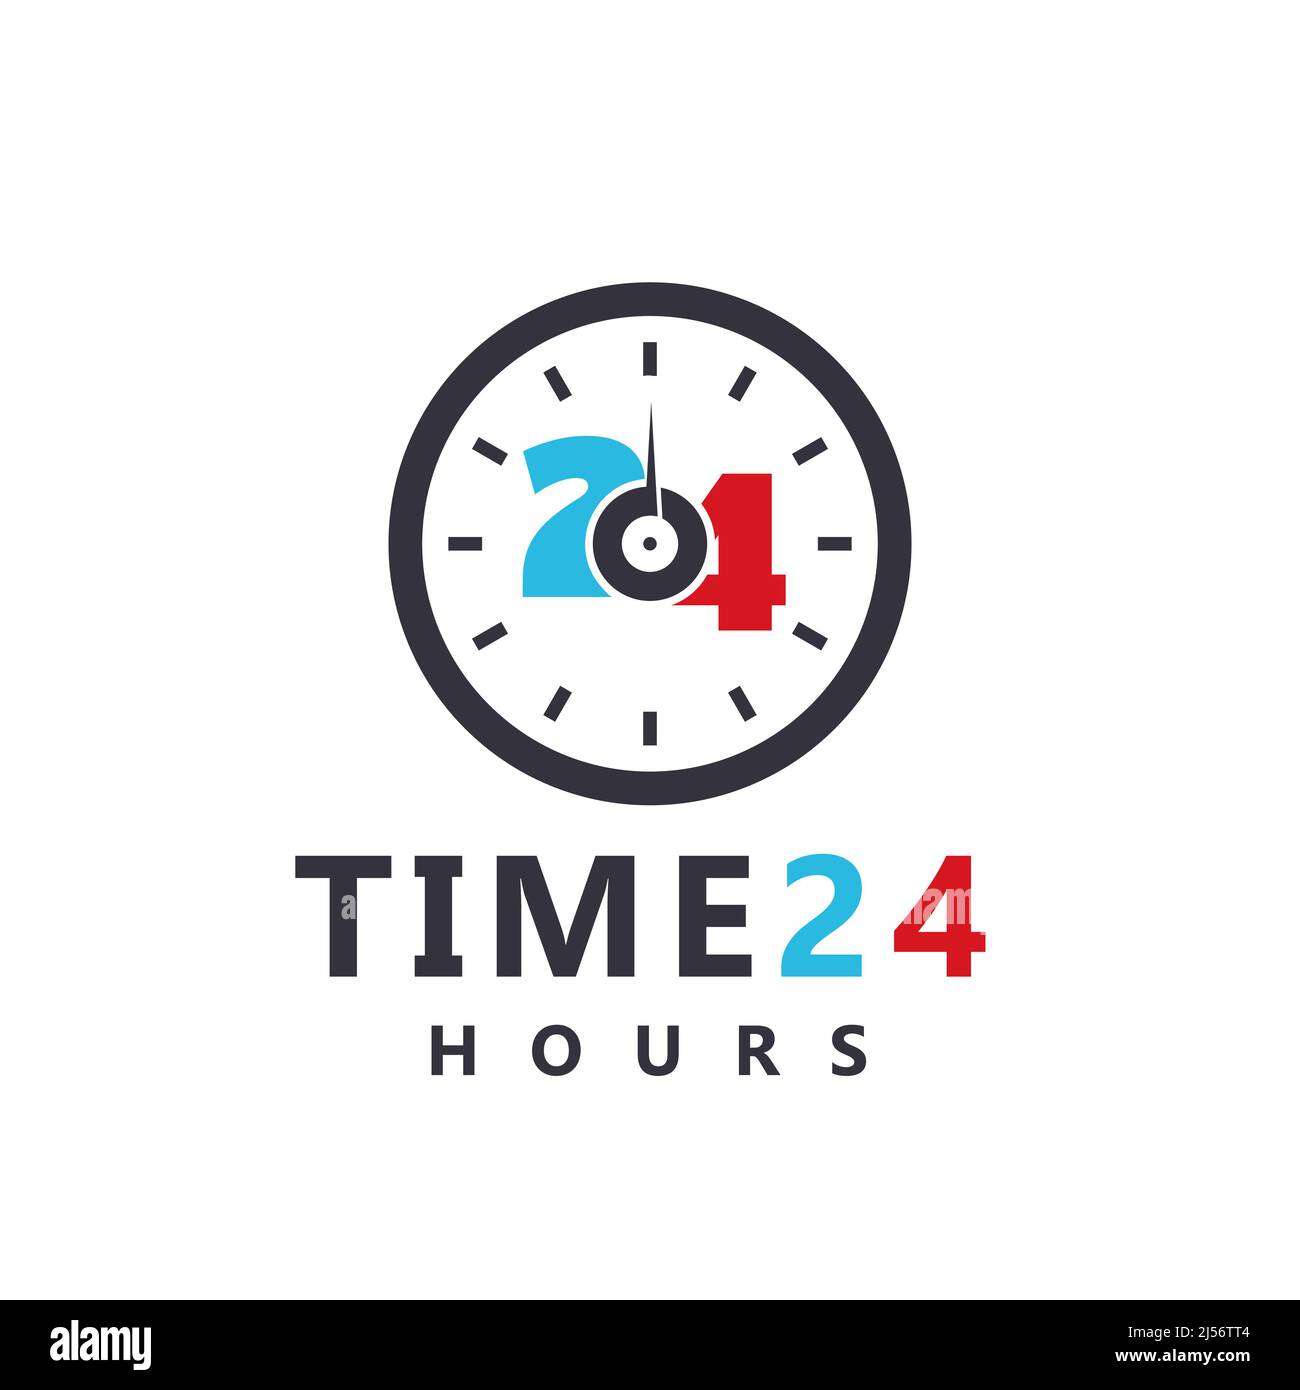 24-hour service clock icon with hour scale logo. Vector illustration. Stock Vector